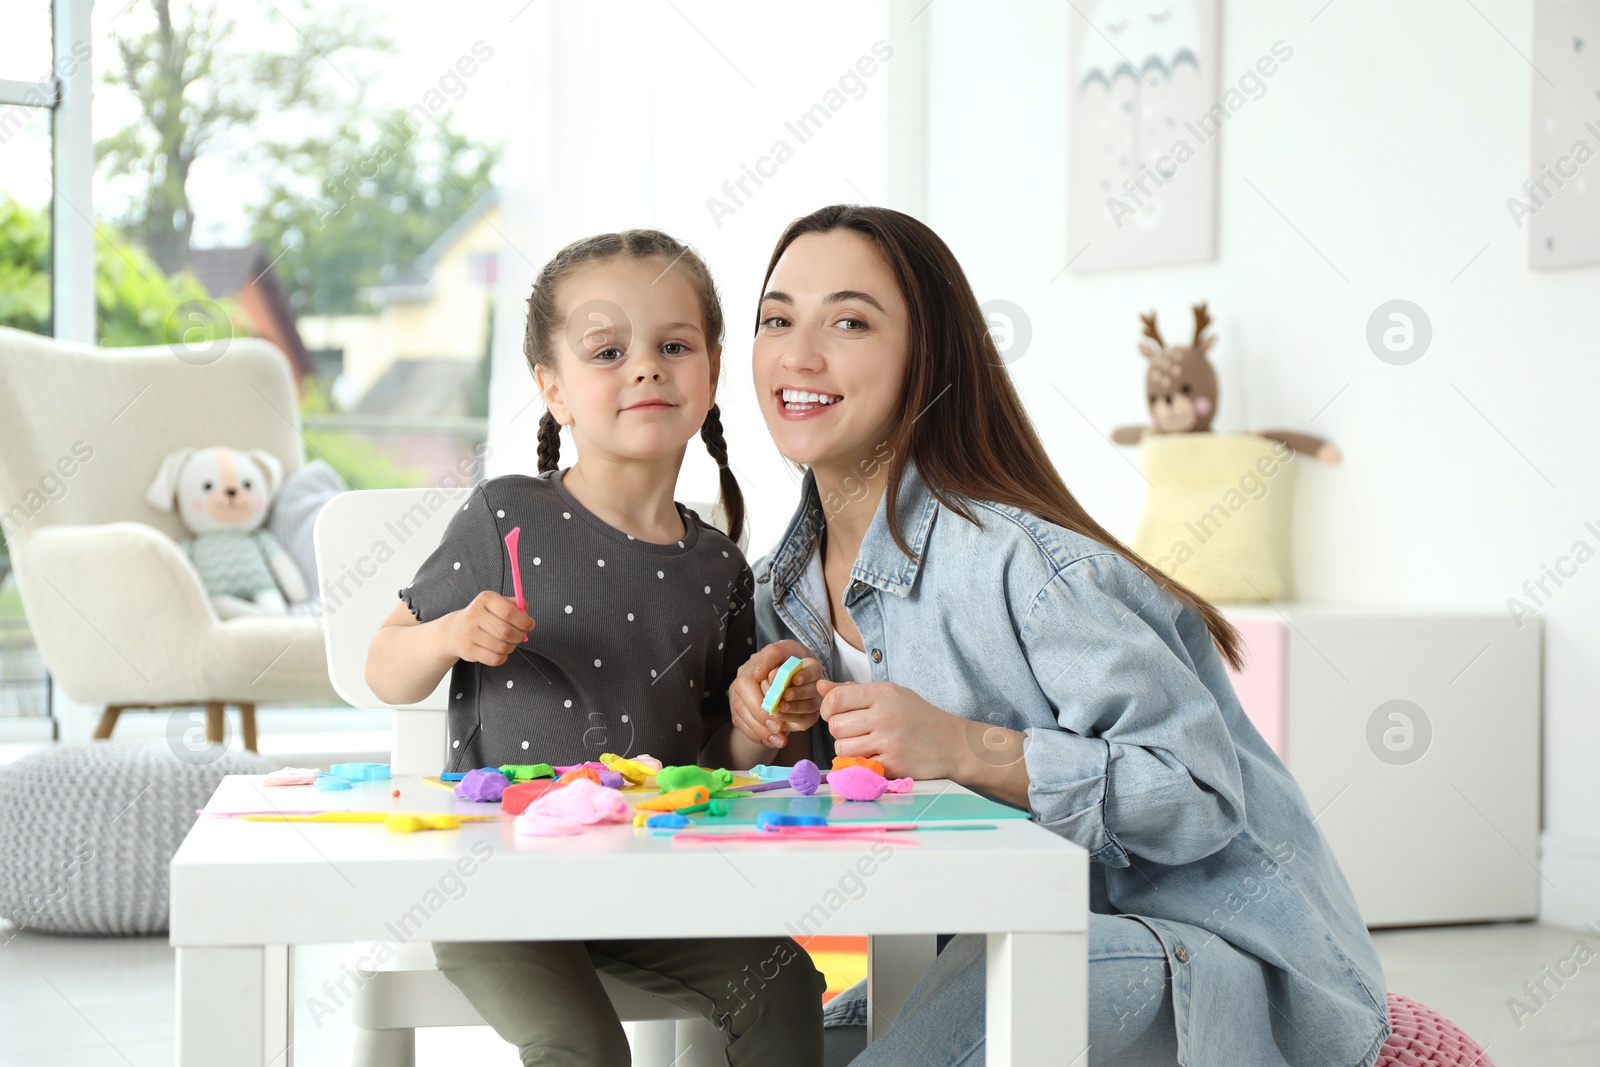 Photo of Play dough activity. Family portrait of smiling mother with her daughter at home